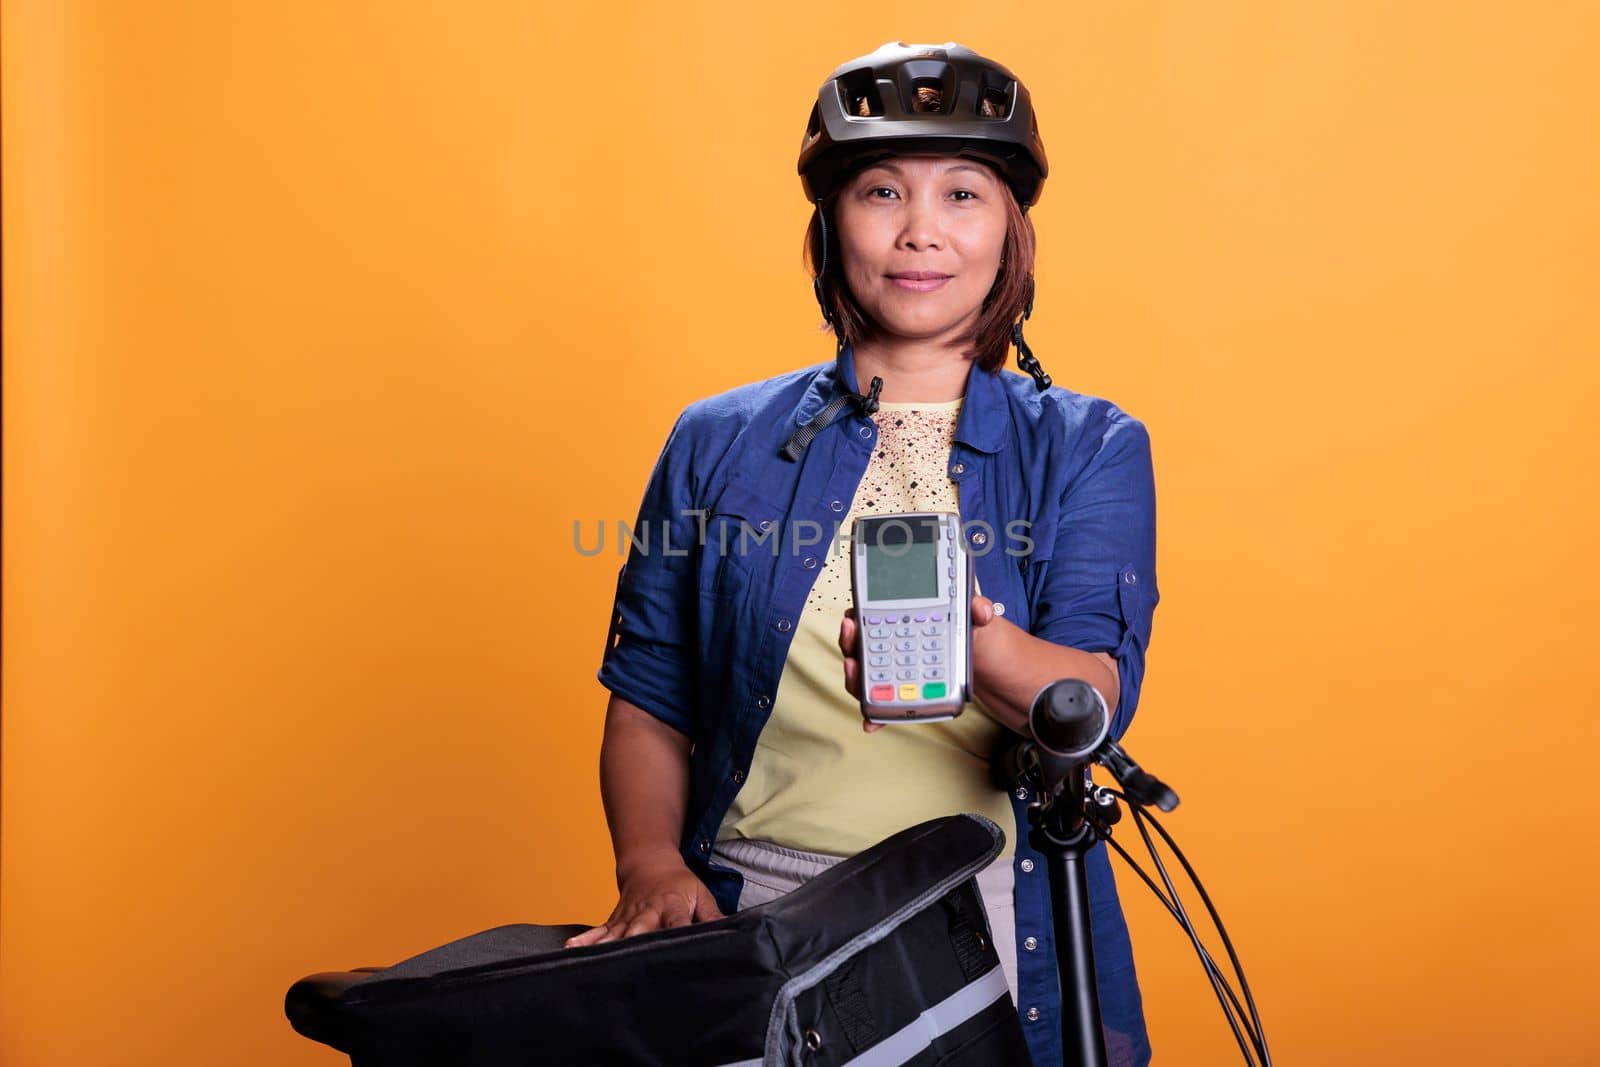 Portrait of deliverywoman with blue uniform and helmet delivering fast food order giving POS terminal to customer. Pizzeria employee using bike as transportation while carrying takeout food backpack